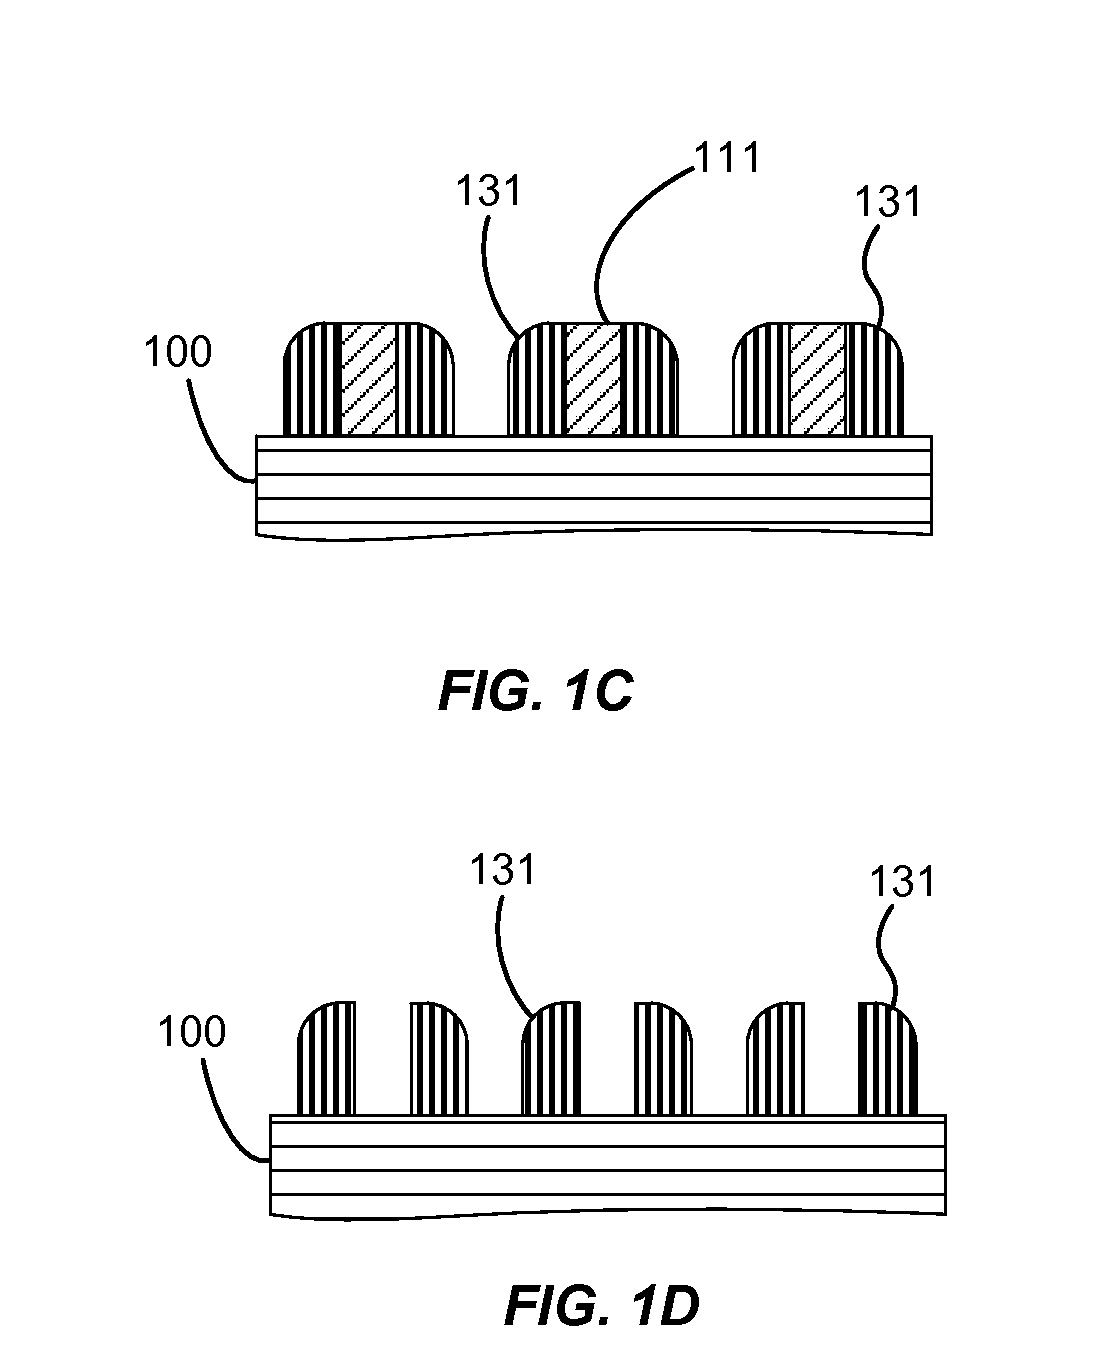 Self-aligned multi-patterning for advanced critical dimension contacts